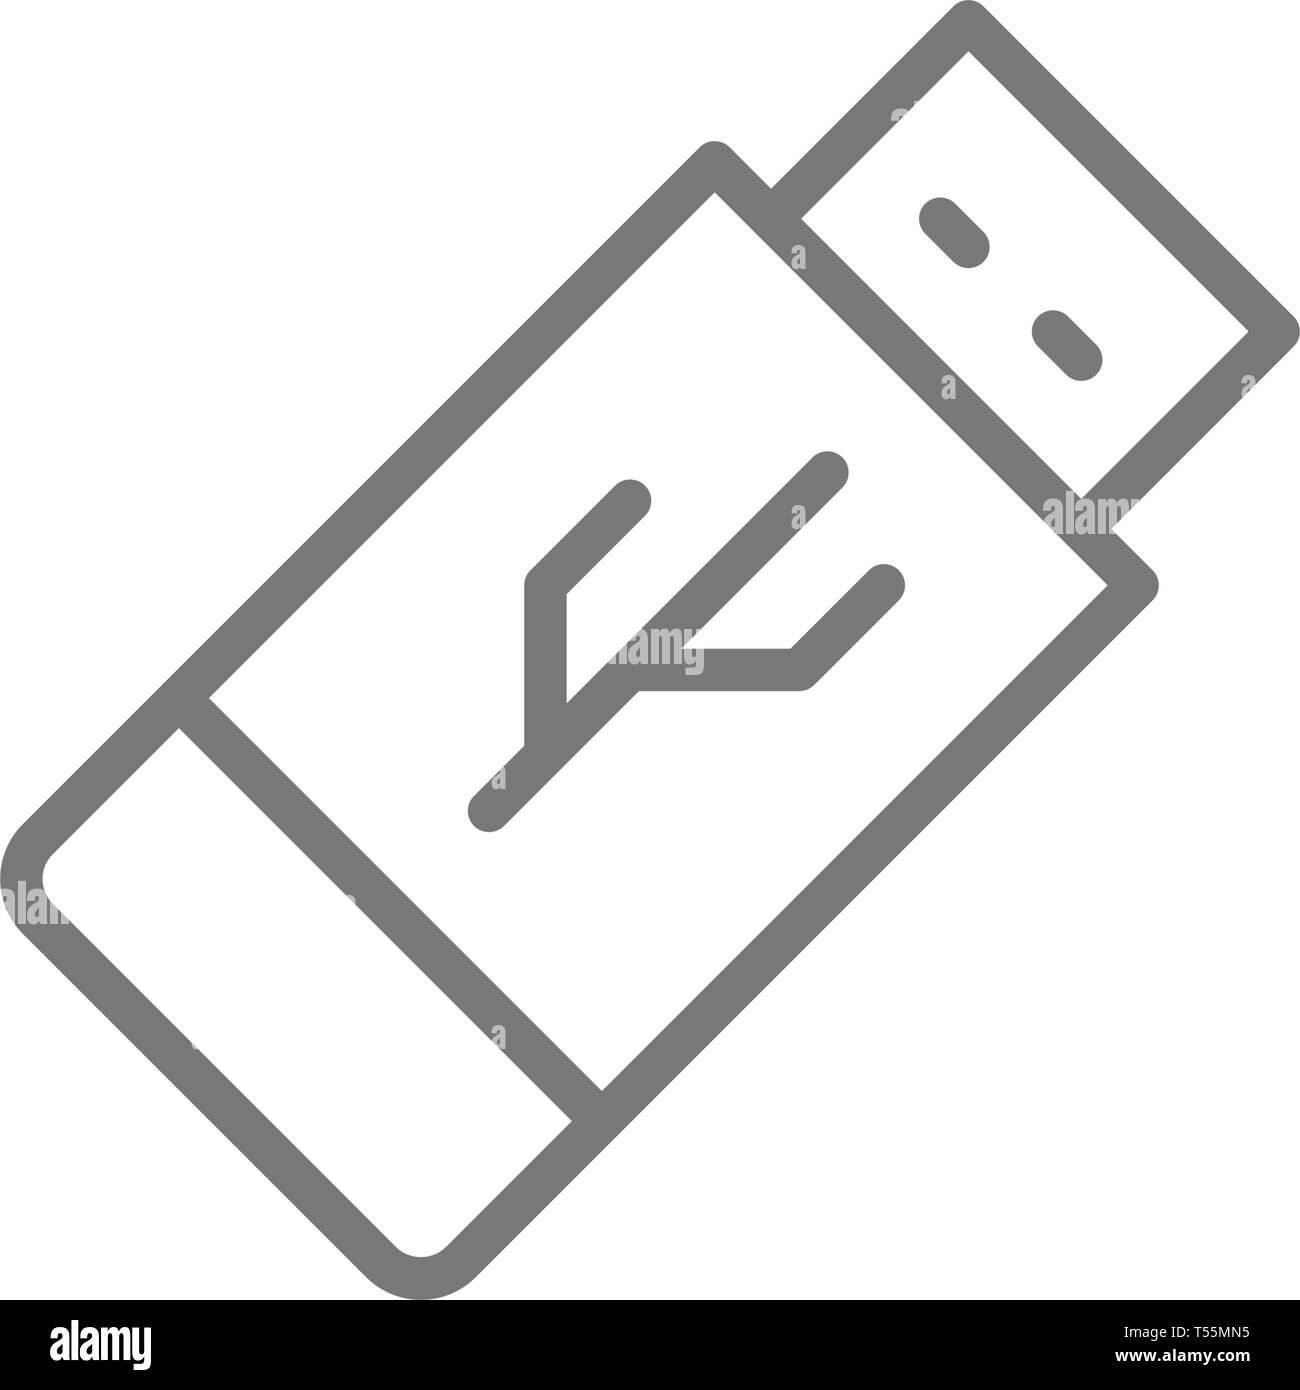 Pendrive Sketch Icon Isolated On White Background Pendrive Sketch Icon For  Infographic Website Or App Stock Illustration  Download Image Now  iStock